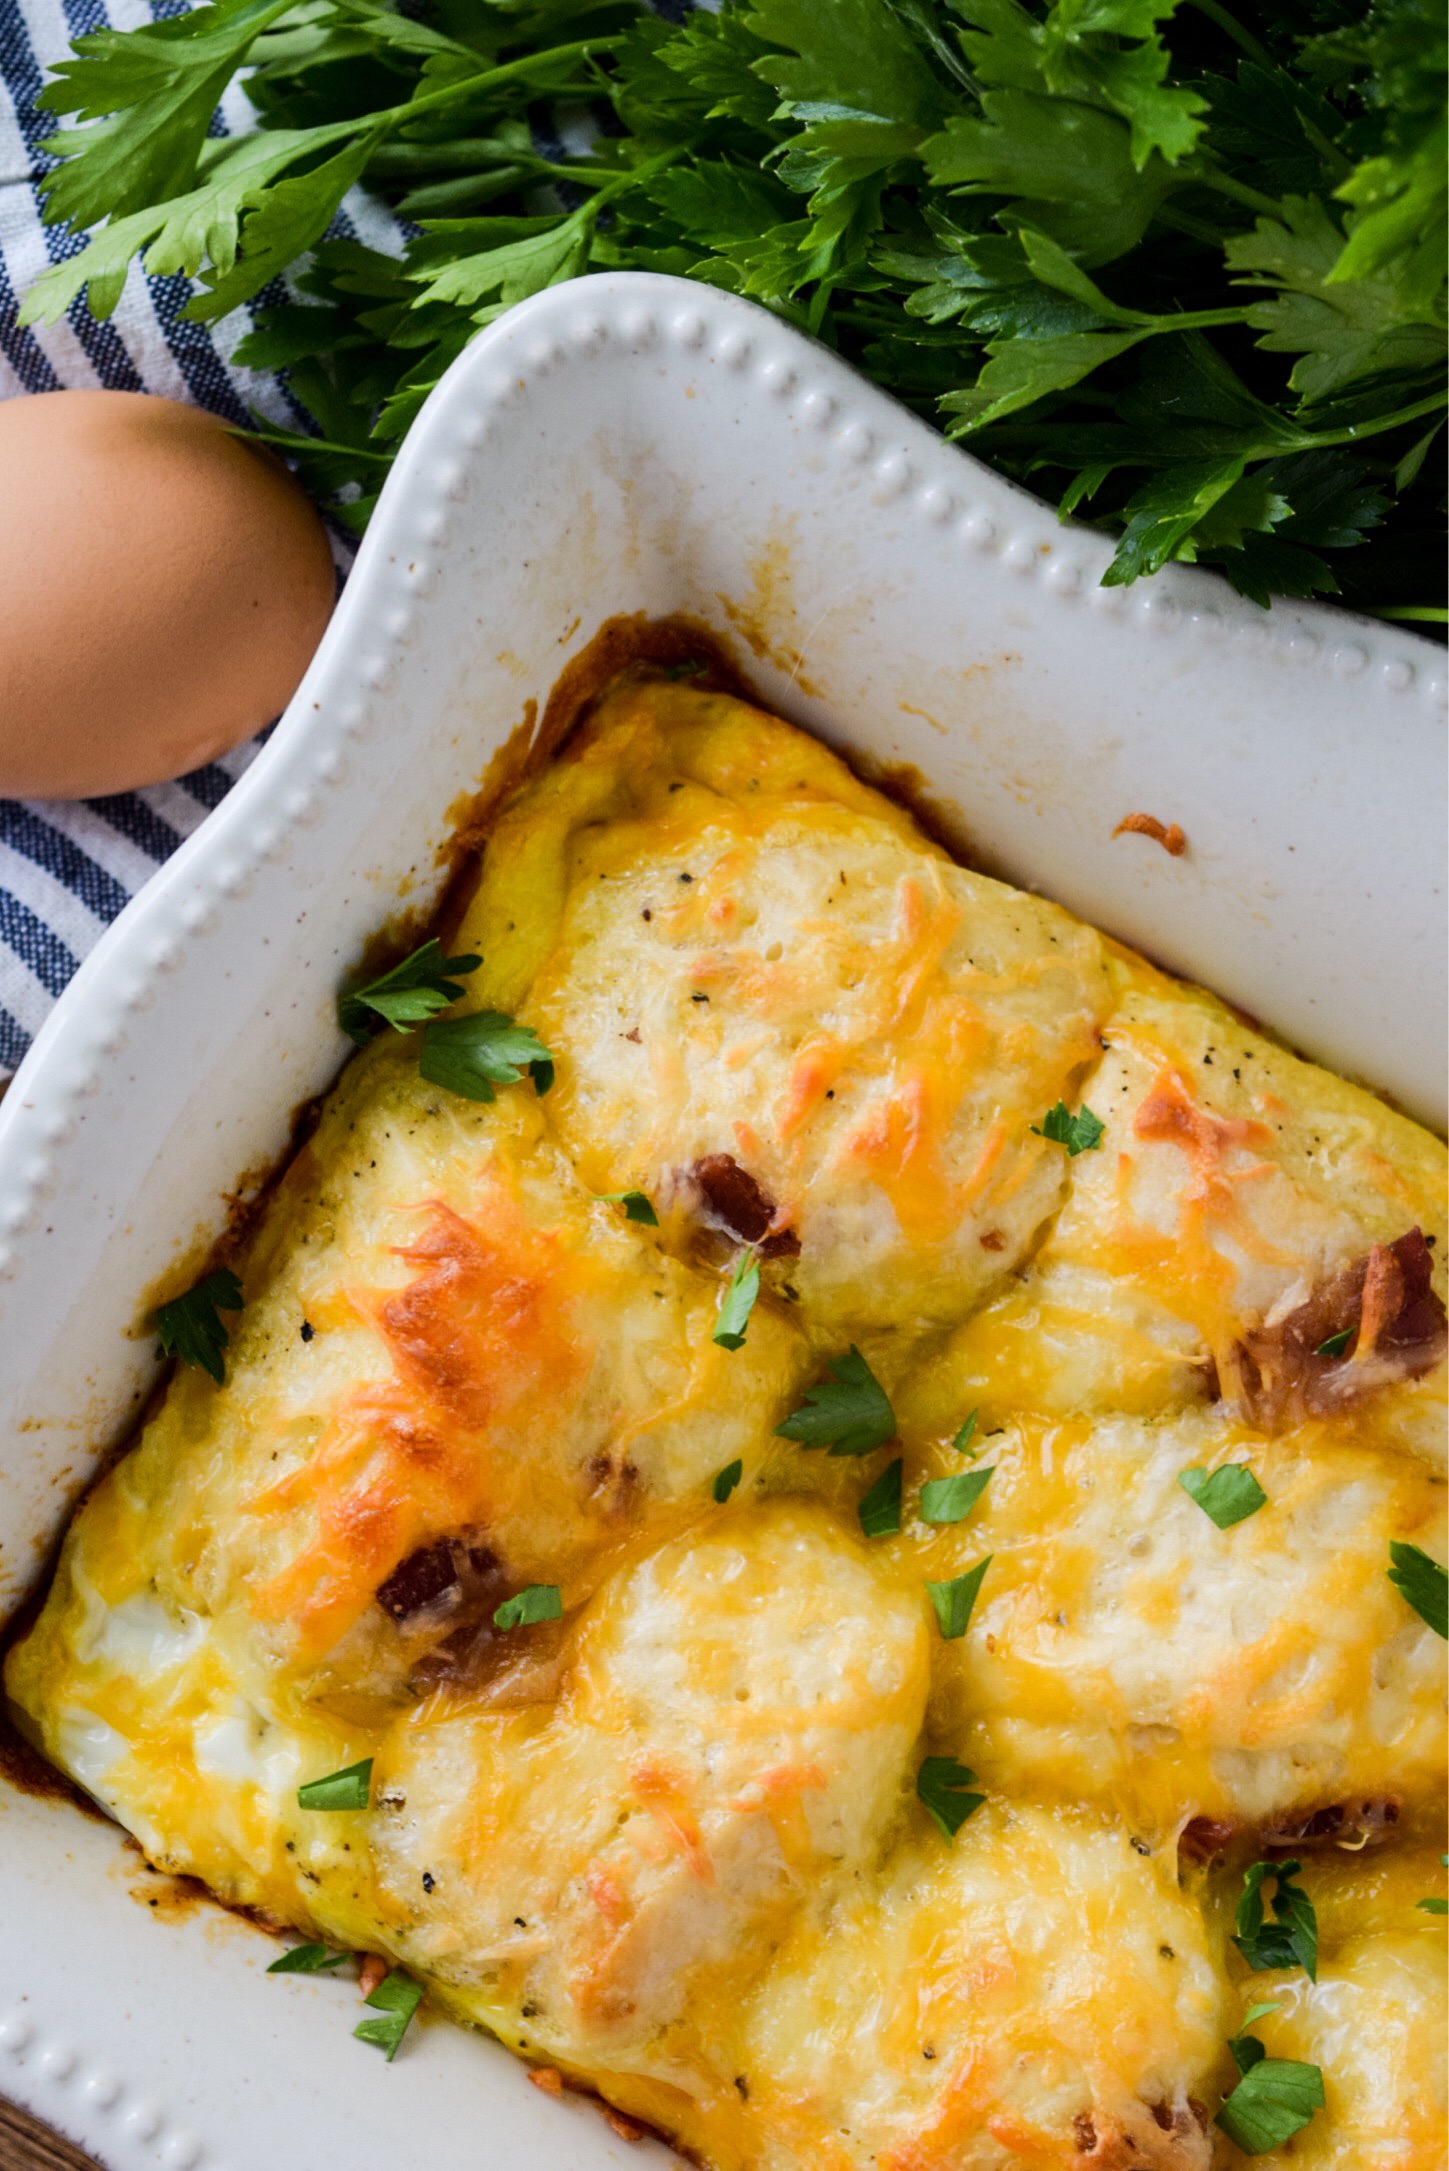 This easy Bacon, Egg and Biscuit Breakfast Bake is so quick to throw together! It was a major hit with my husband!